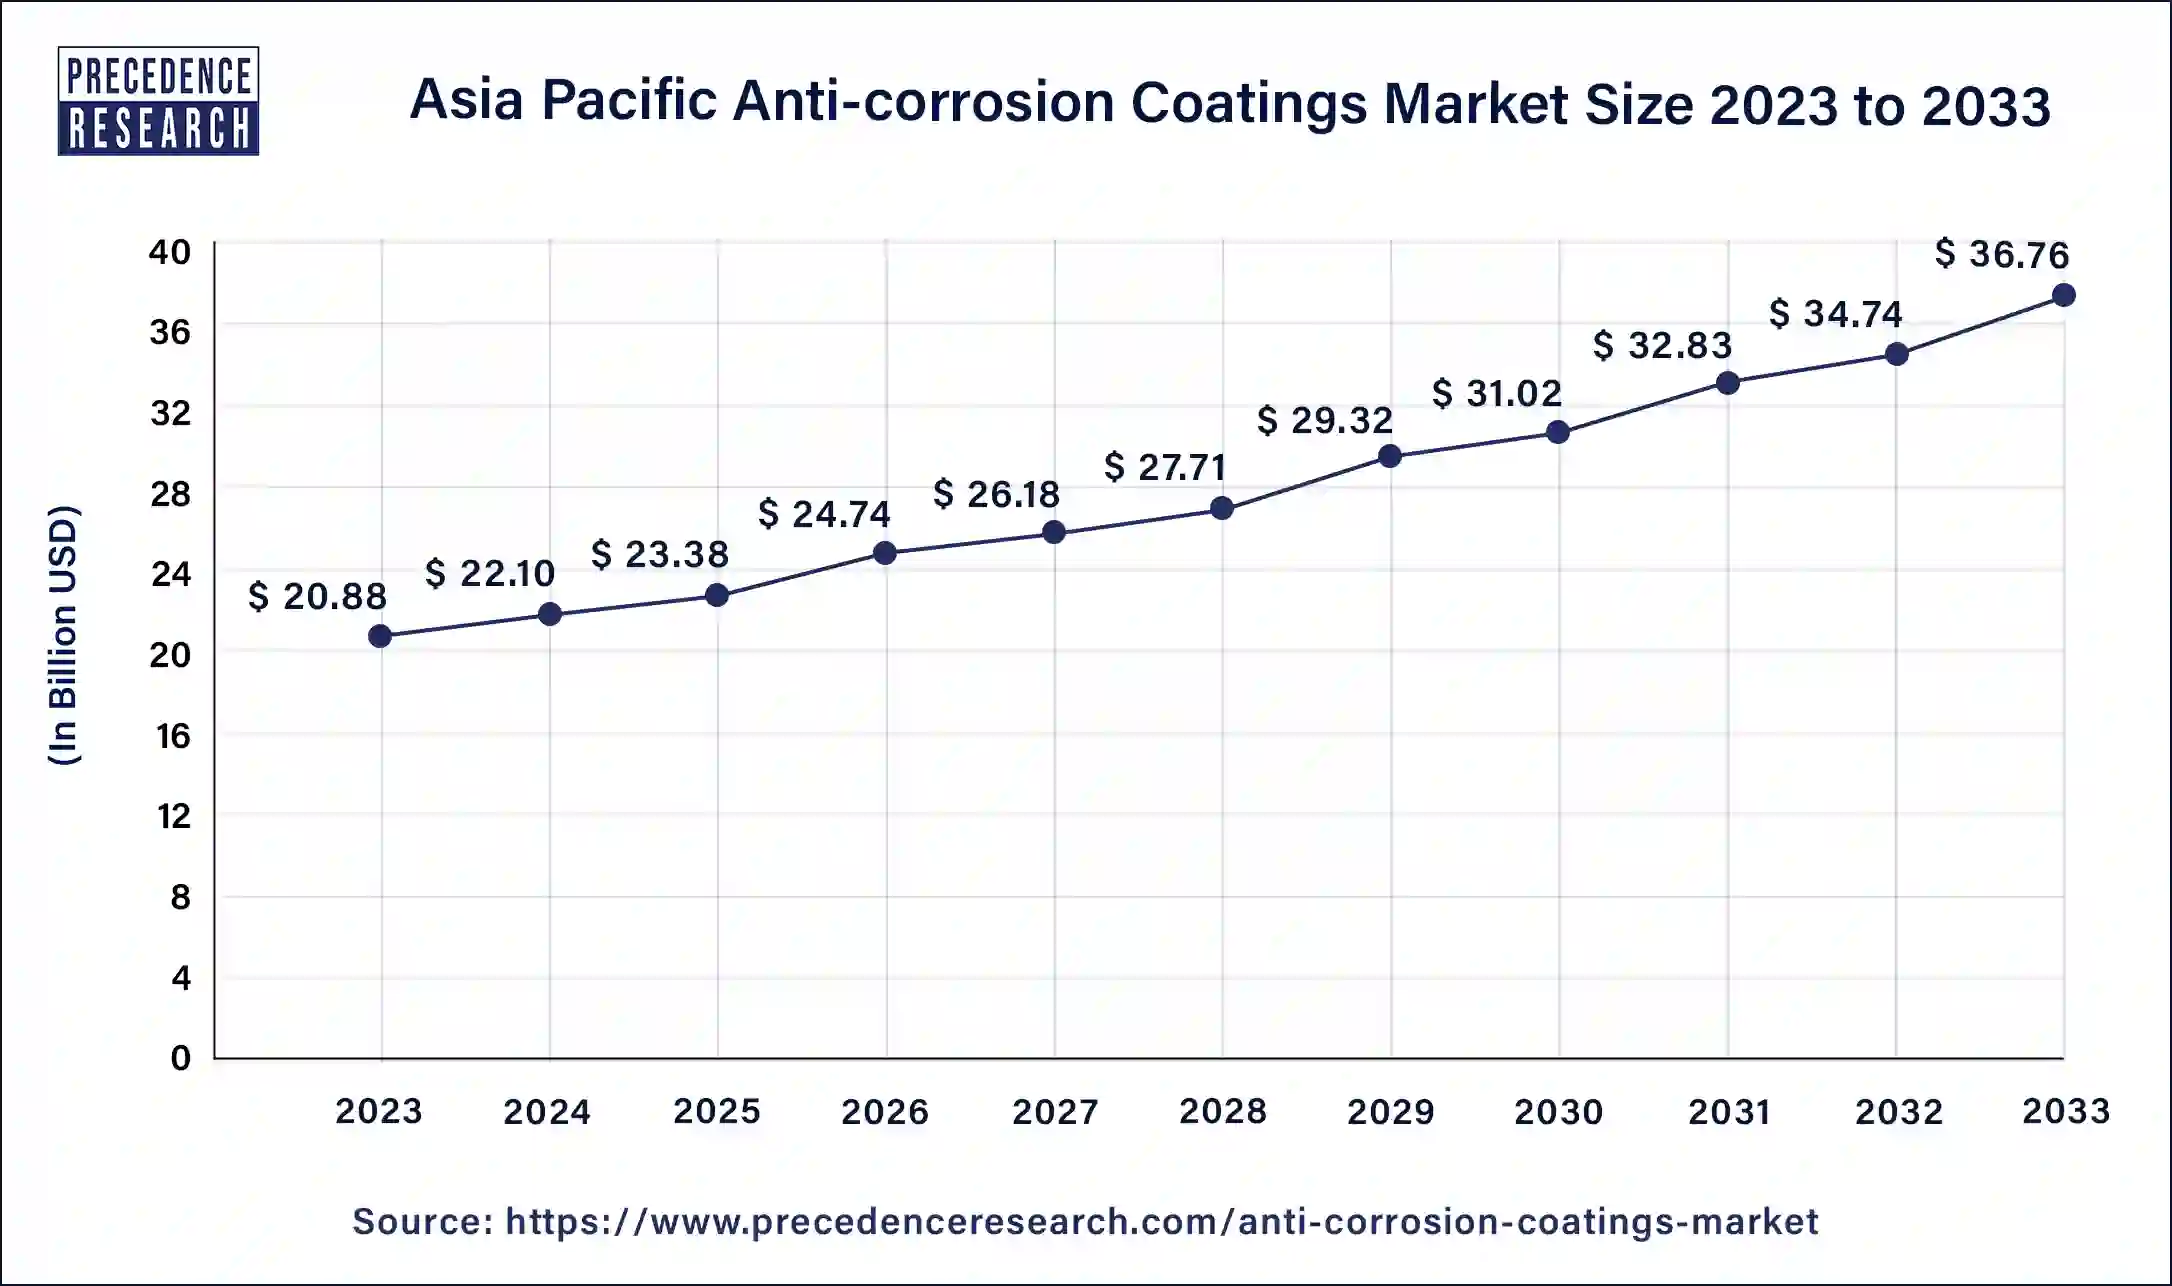 Asia Pacific Anti-corrosion Coatings Market Size 2024 to 2033